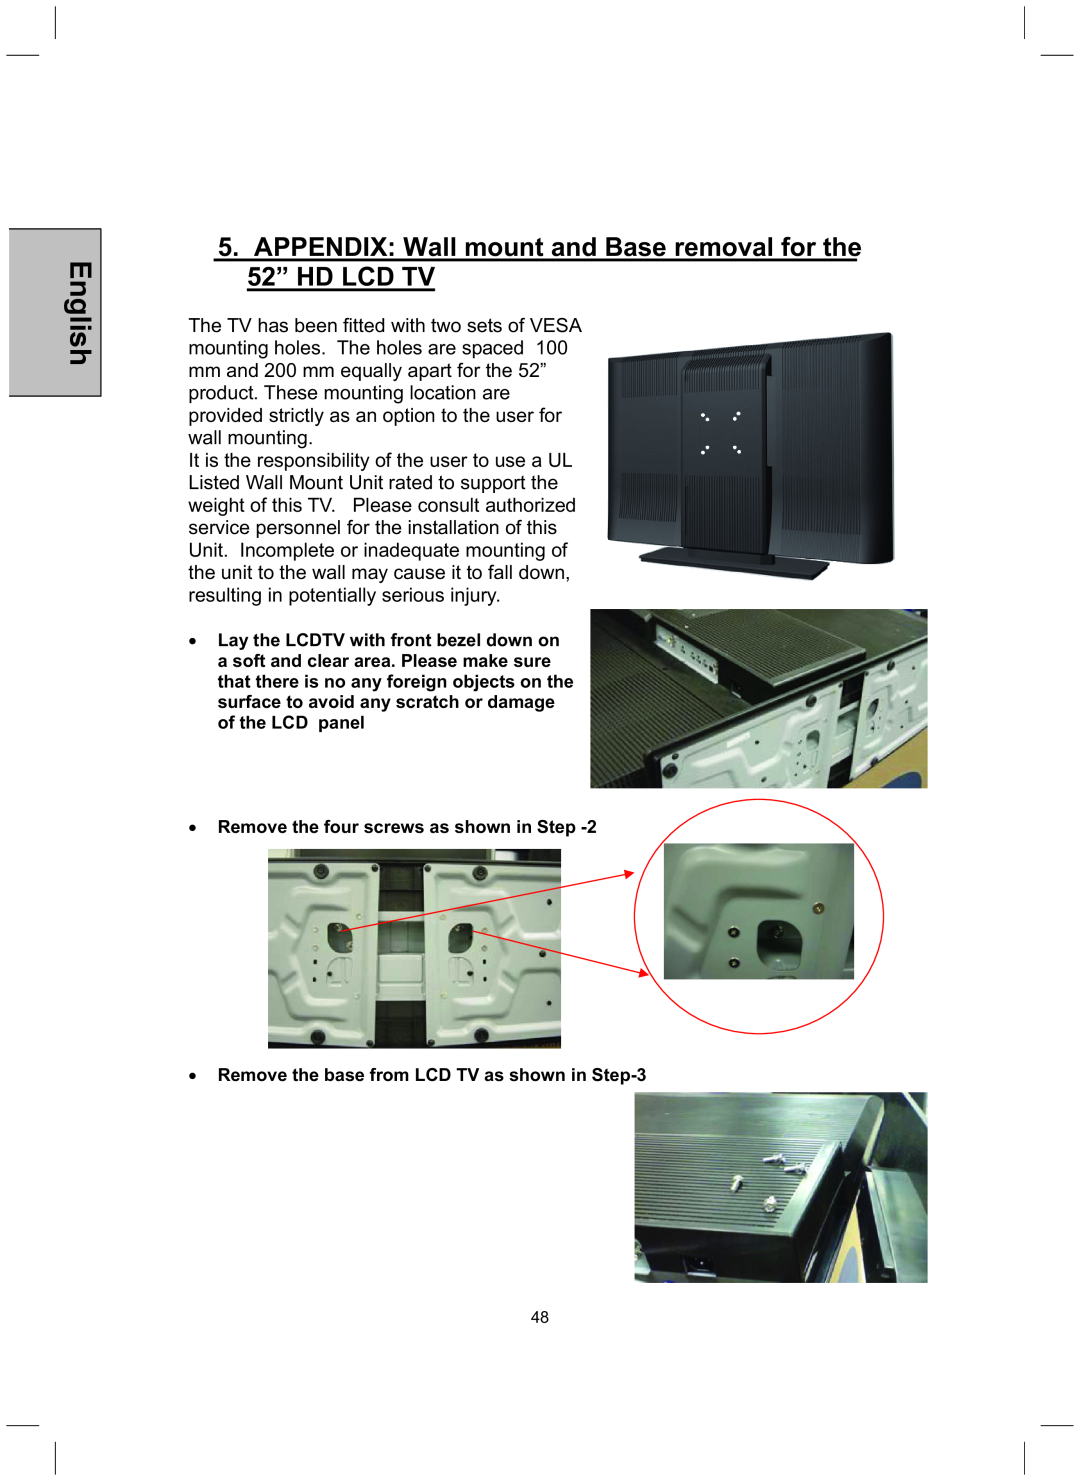 Westinghouse TX-52H480S user manual APPENDIX Wall mount and Base removal for the 52” HD LCD TV, English 